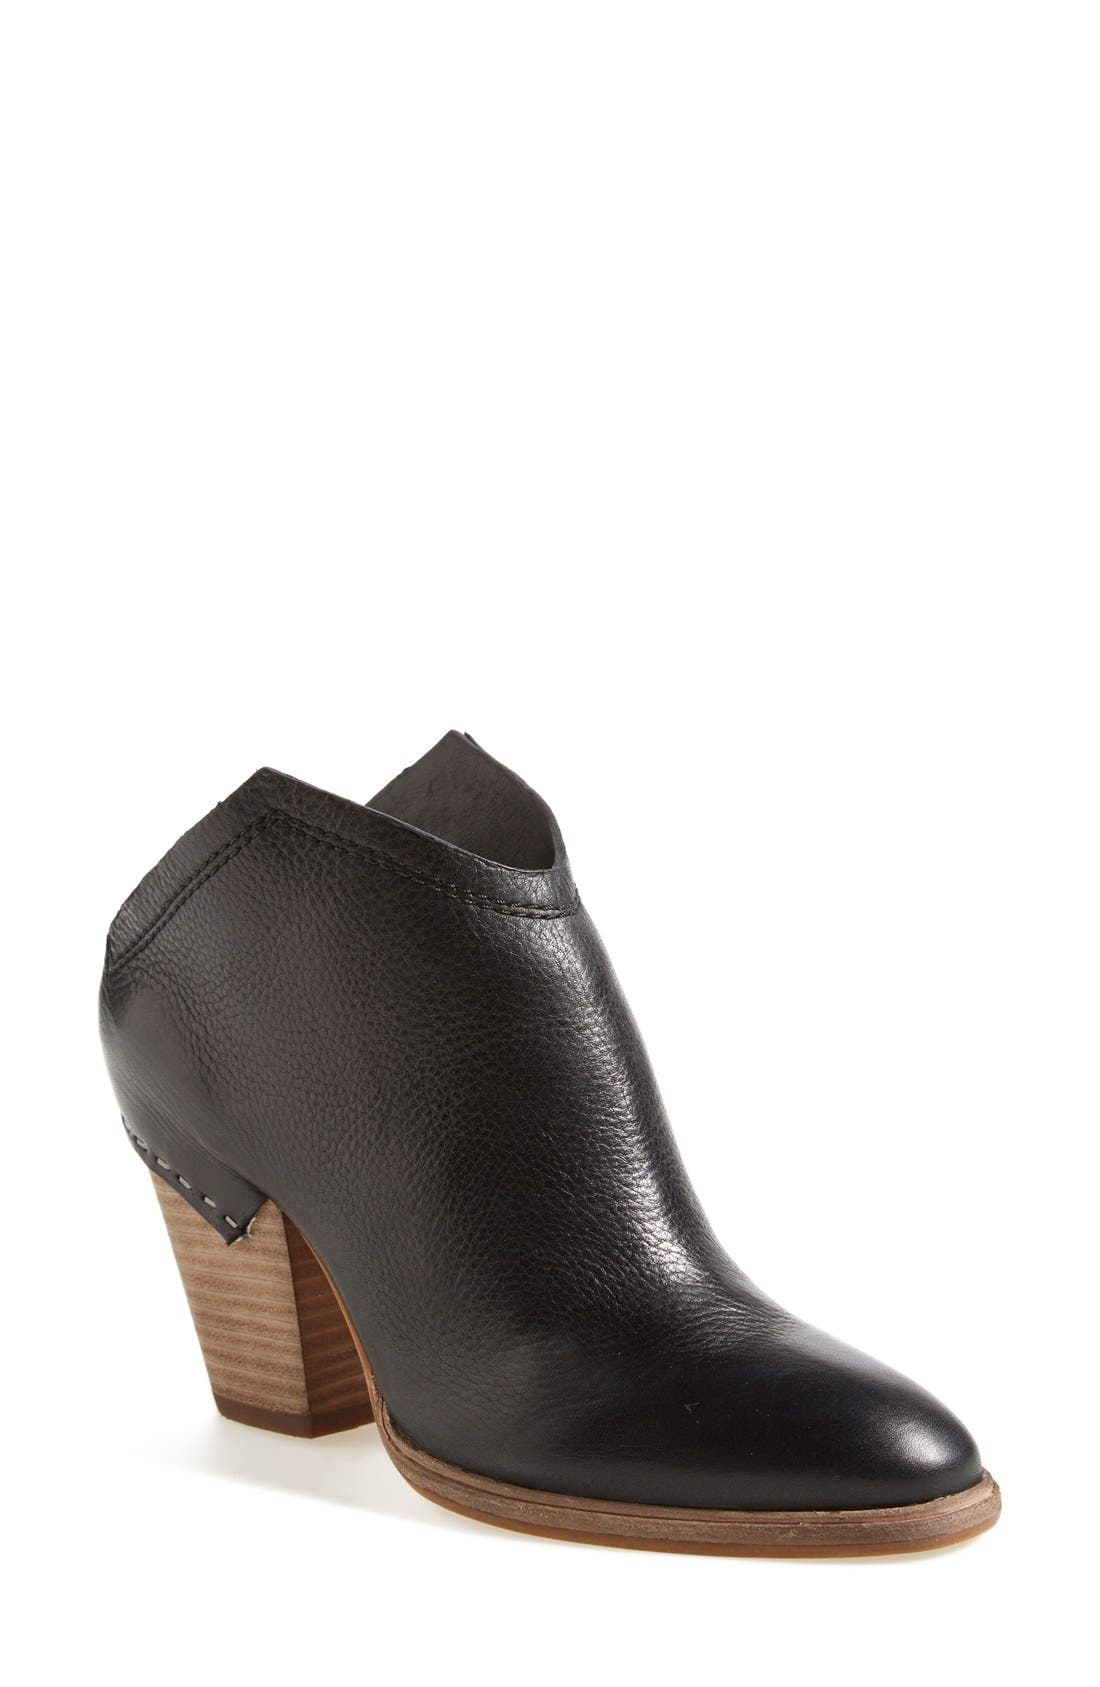 dolce vita ankle boots nordstrom